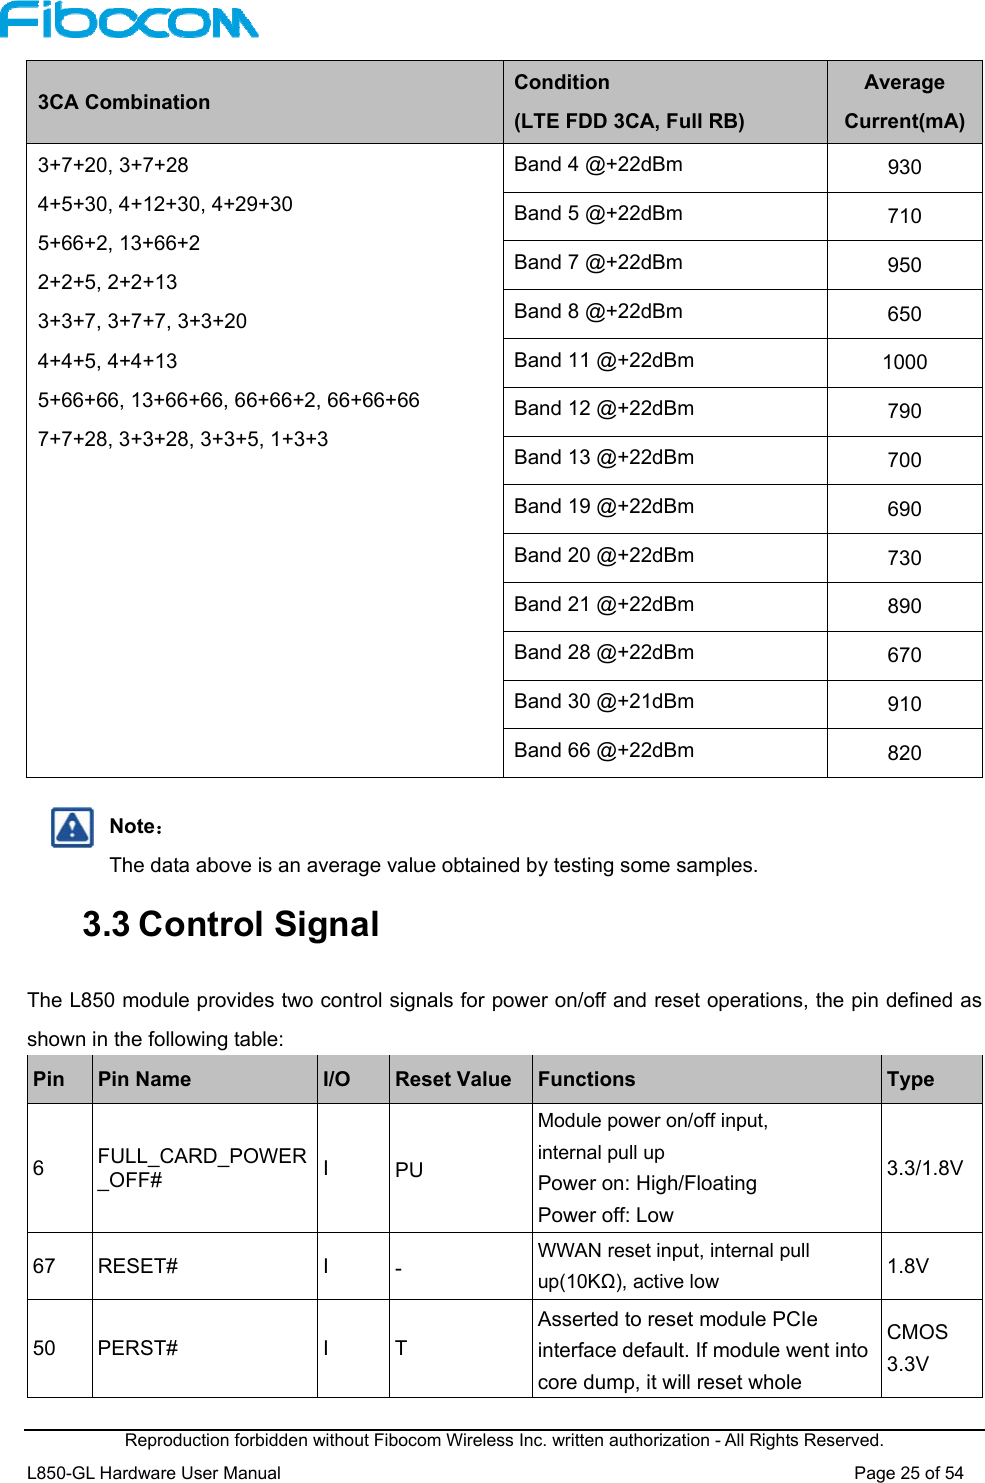  Reproduction forbidden without Fibocom Wireless Inc. written authorization - All Rights Reserved. L850-GL Hardware User Manual                                                                 Page 25 of 54 3CA Combination Condition (LTE FDD 3CA, Full RB) Average Current(mA) 3+7+20, 3+7+28 4+5+30, 4+12+30, 4+29+30 5+66+2, 13+66+2 2+2+5, 2+2+13 3+3+7, 3+7+7, 3+3+20 4+4+5, 4+4+13 5+66+66, 13+66+66, 66+66+2, 66+66+66 7+7+28, 3+3+28, 3+3+5, 1+3+3 Band 4 @+22dBm  930 Band 5 @+22dBm  710 Band 7 @+22dBm  950 Band 8 @+22dBm  650 Band 11 @+22dBm  1000 Band 12 @+22dBm  790 Band 13 @+22dBm  700 Band 19 @+22dBm  690 Band 20 @+22dBm  730 Band 21 @+22dBm  890 Band 28 @+22dBm  670 Band 30 @+21dBm  910 Band 66 @+22dBm  820  Note： The data above is an average value obtained by testing some samples. 3.3 Control Signal The L850 module provides two control signals for power on/off and reset operations, the pin defined as shown in the following table:   Pin  Pin Name  I/O  Reset Value  Functions  Type 6  FULL_CARD_POWER_OFF#  I  PU Module power on/off input,   internal pull up Power on: High/Floating Power off: Low 3.3/1.8V 67  RESET#  I  -  WWAN reset input, internal pull up(10KΩ), active low 1.8V 50  PERST#  I  T Asserted to reset module PCIe interface default. If module went into core dump, it will reset whole CMOS 3.3V 